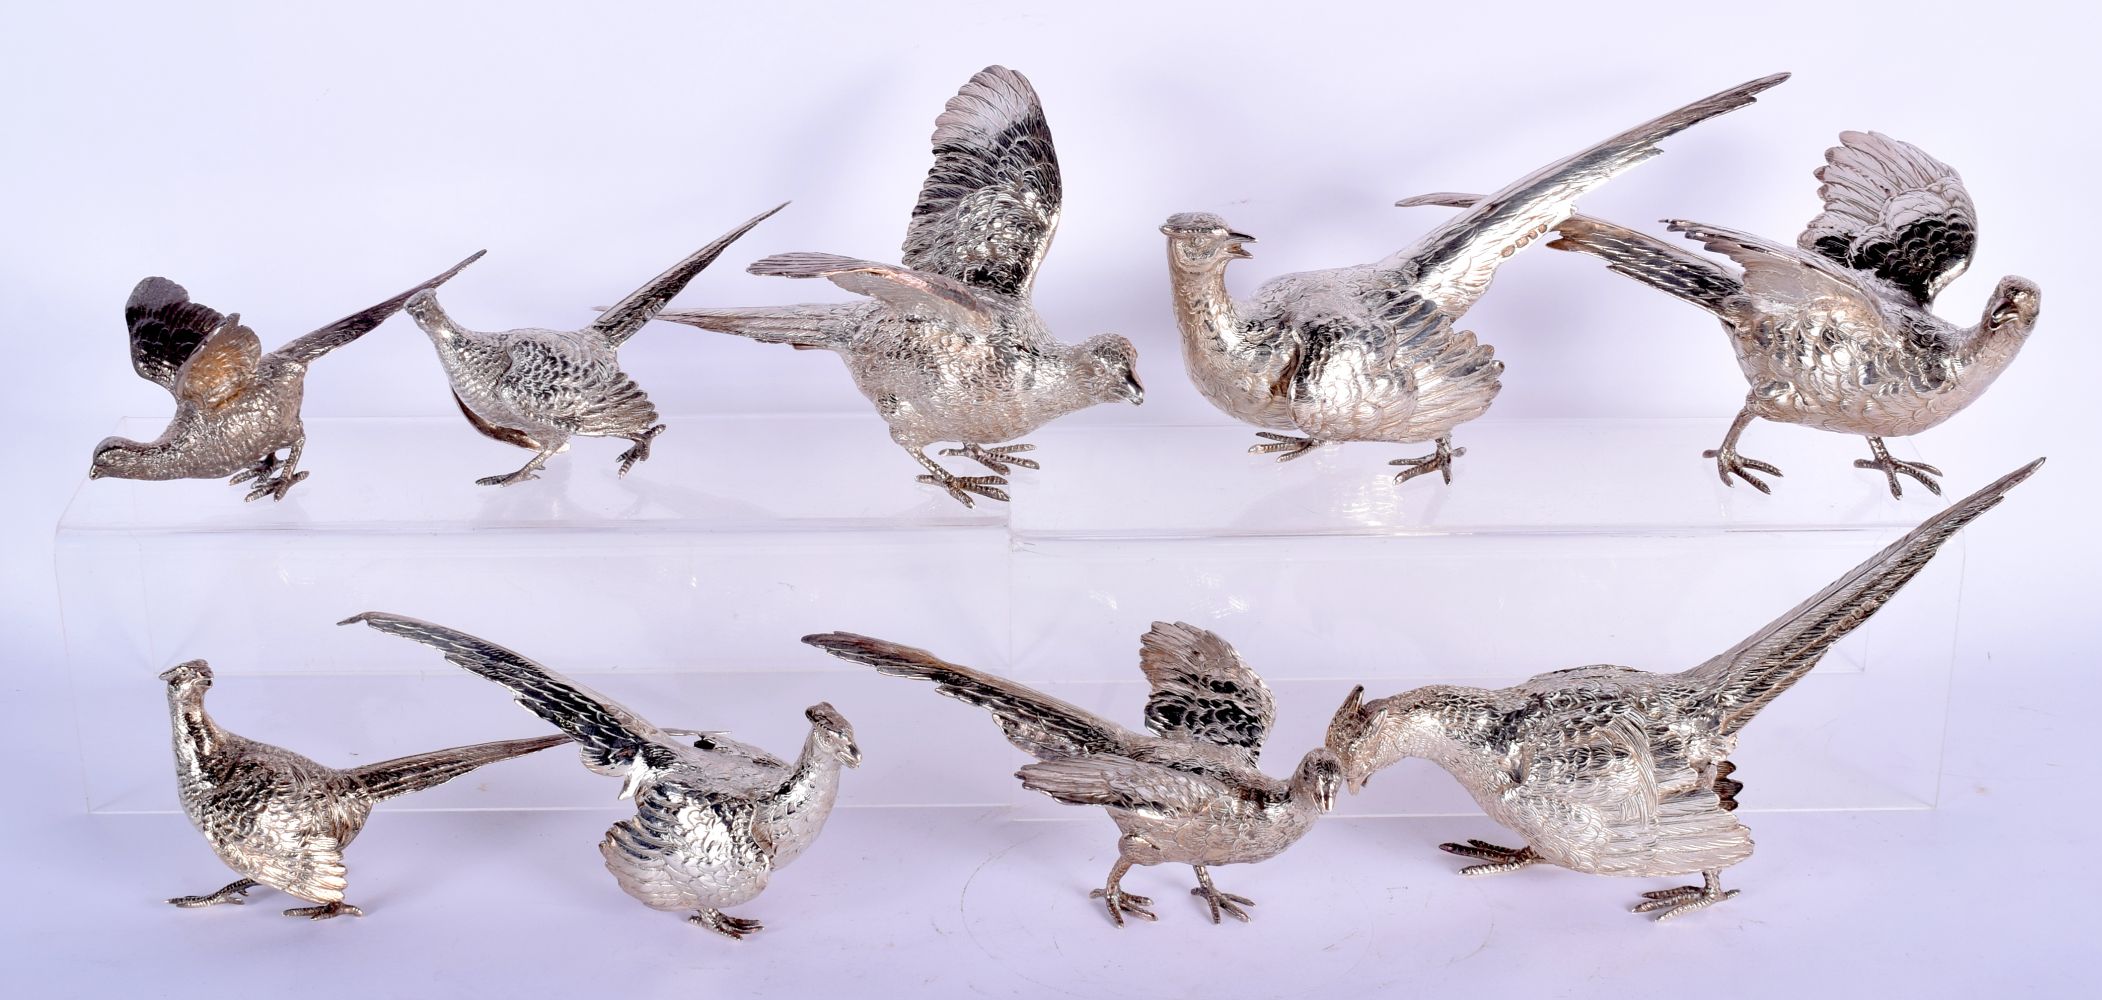 A FINE COLLECTION OF ENGLISH SILVER MODELS OF GAME BIRDS each modelled in various stances. 2196 gram